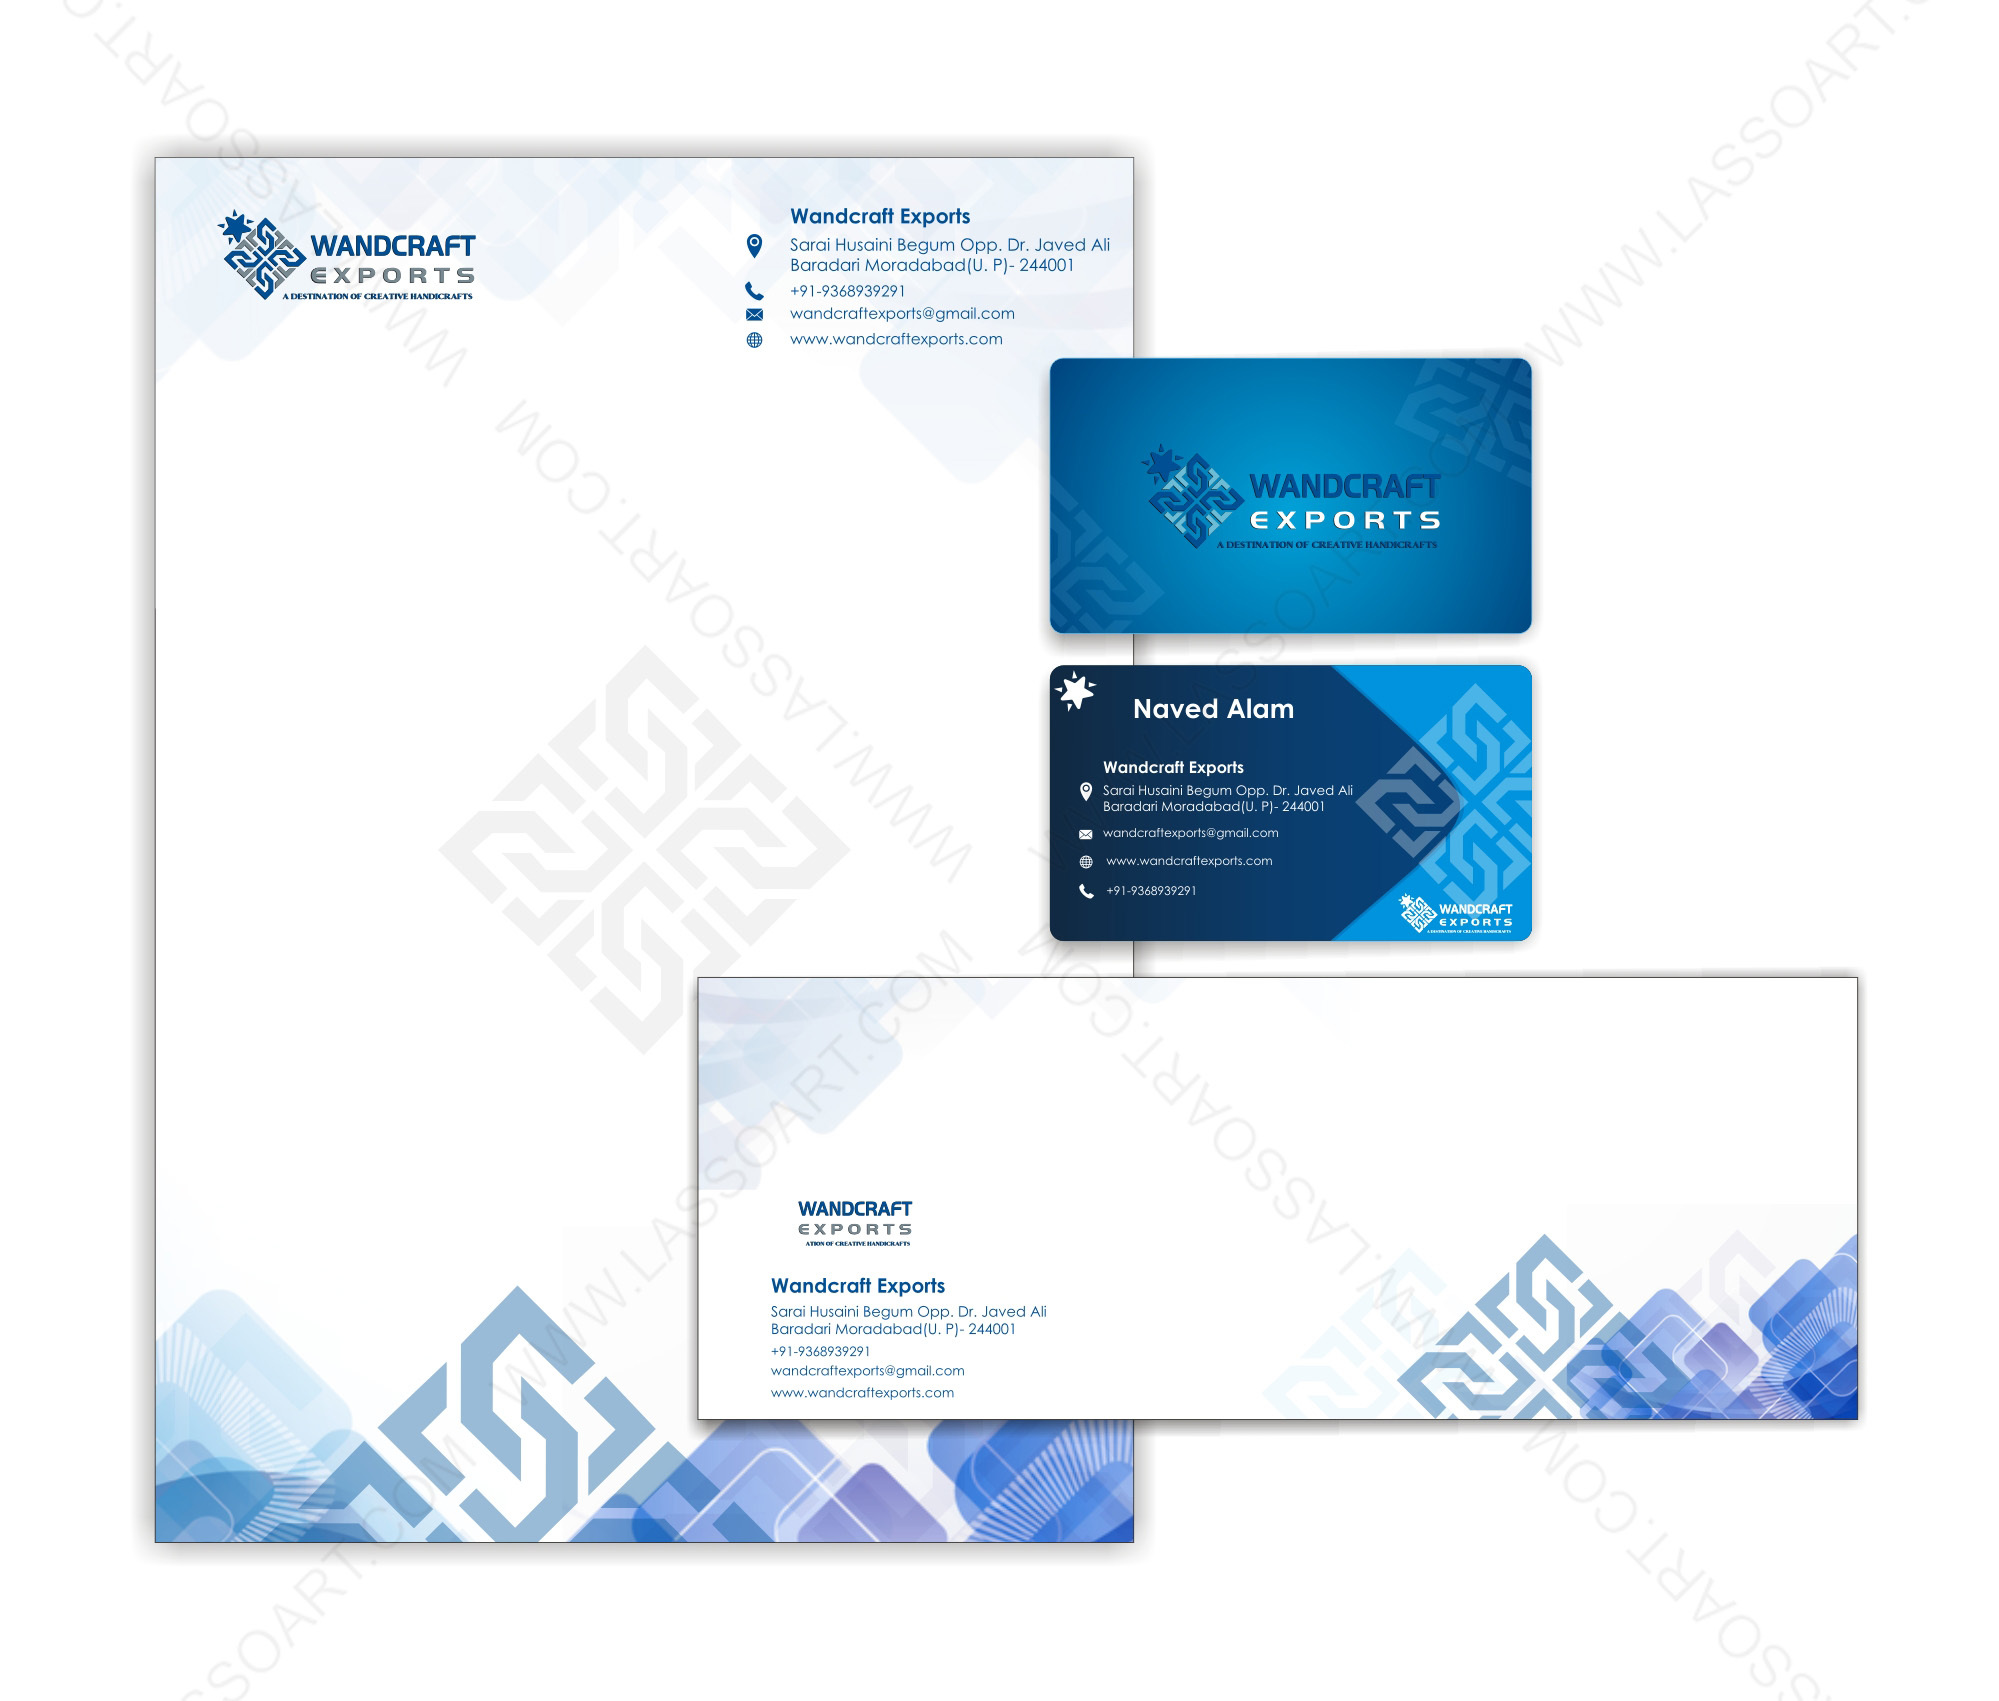 Corporate Identity Creation Services